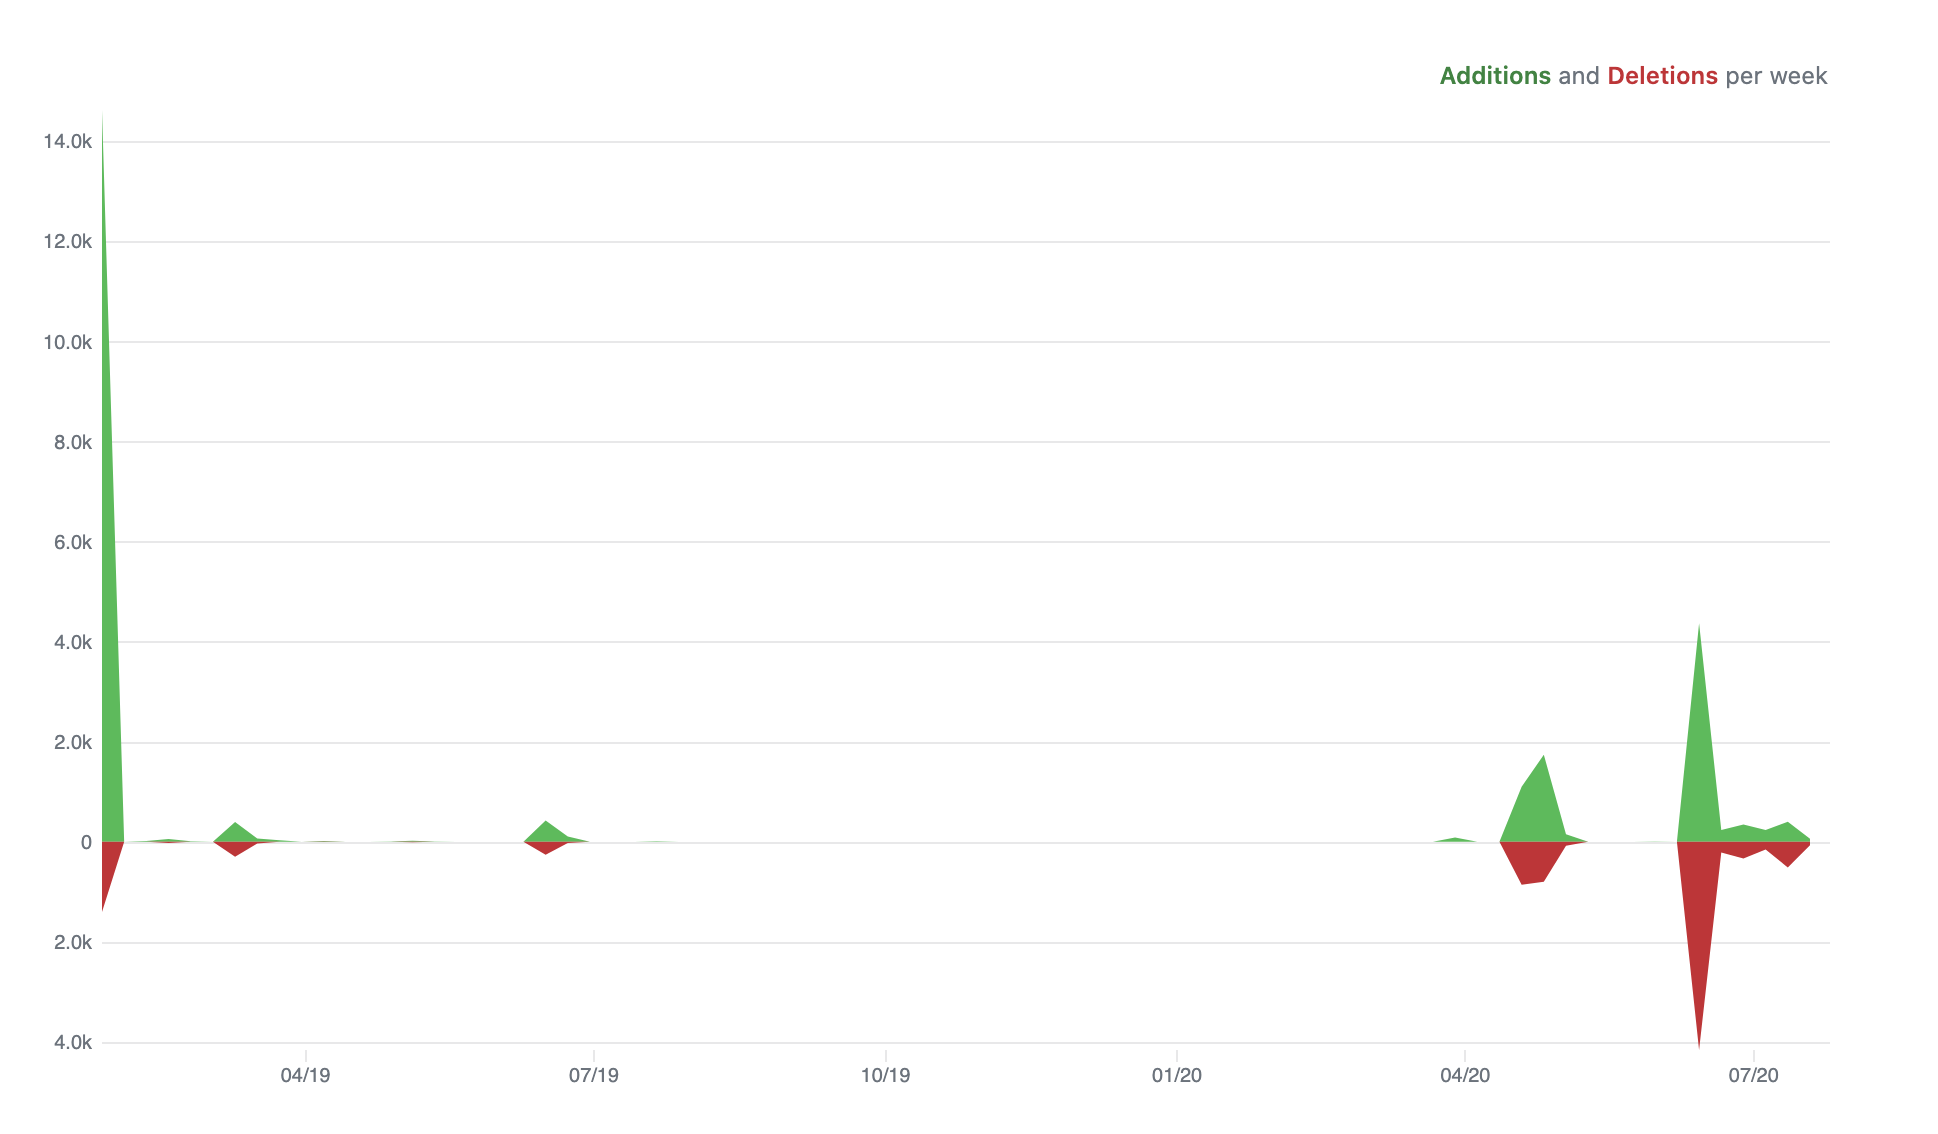 bili addition and deletion graph showing about 14.0k additions when created and less than 2.0k deletion when first created. Very few additions or deletions after the first week of creation.